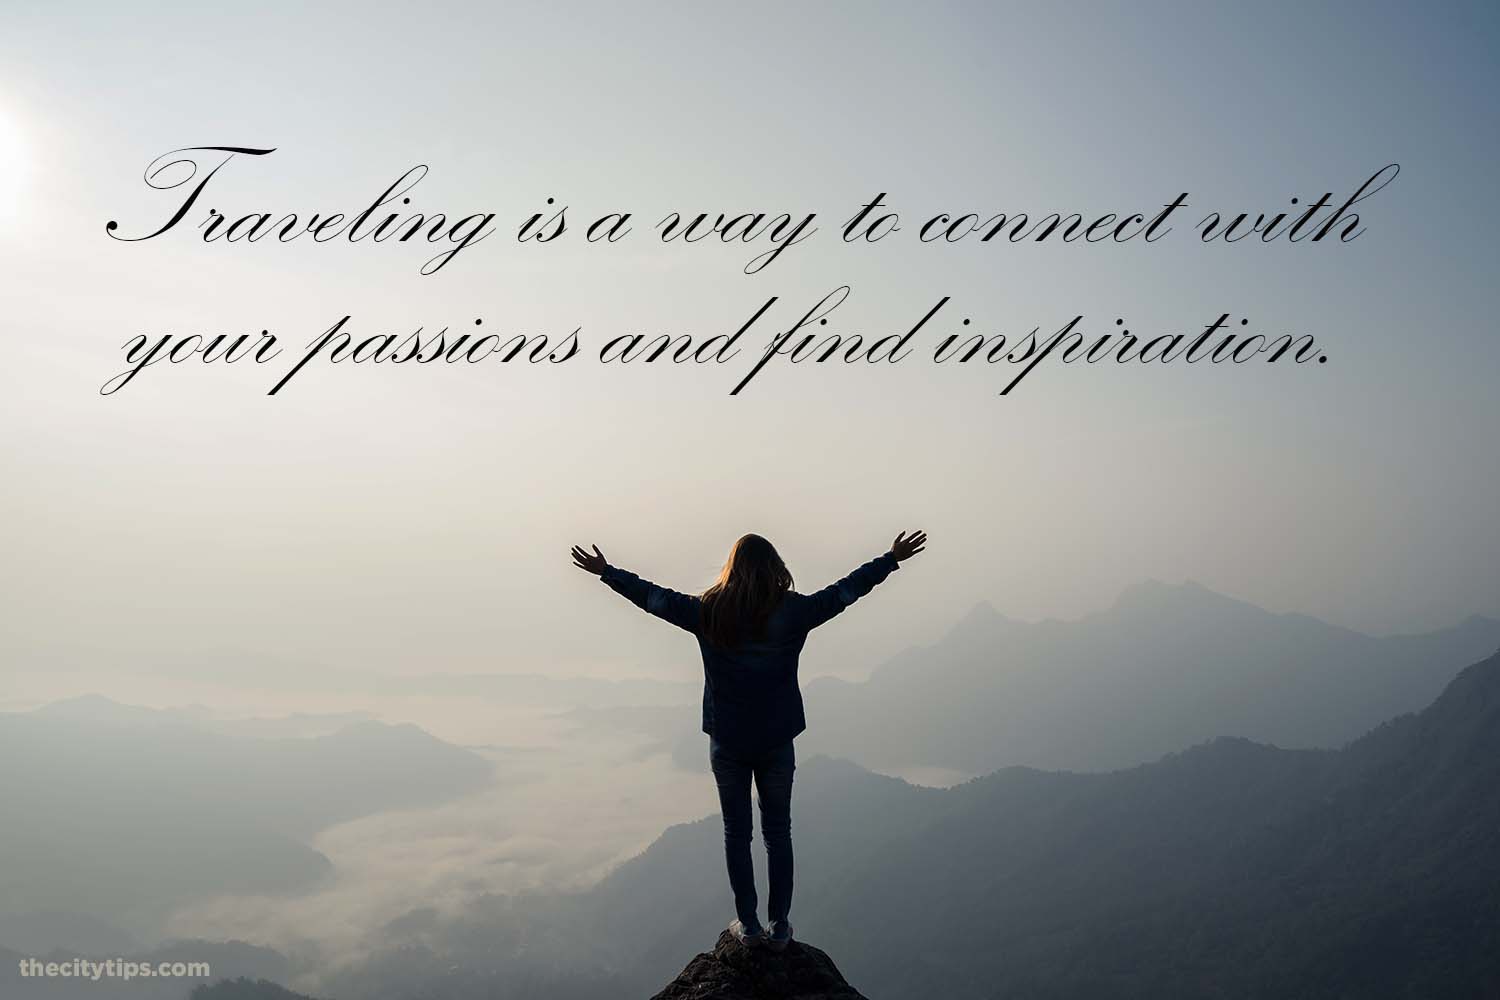 "Traveling is a way to connect with your passions and find inspiration." by Anonymous